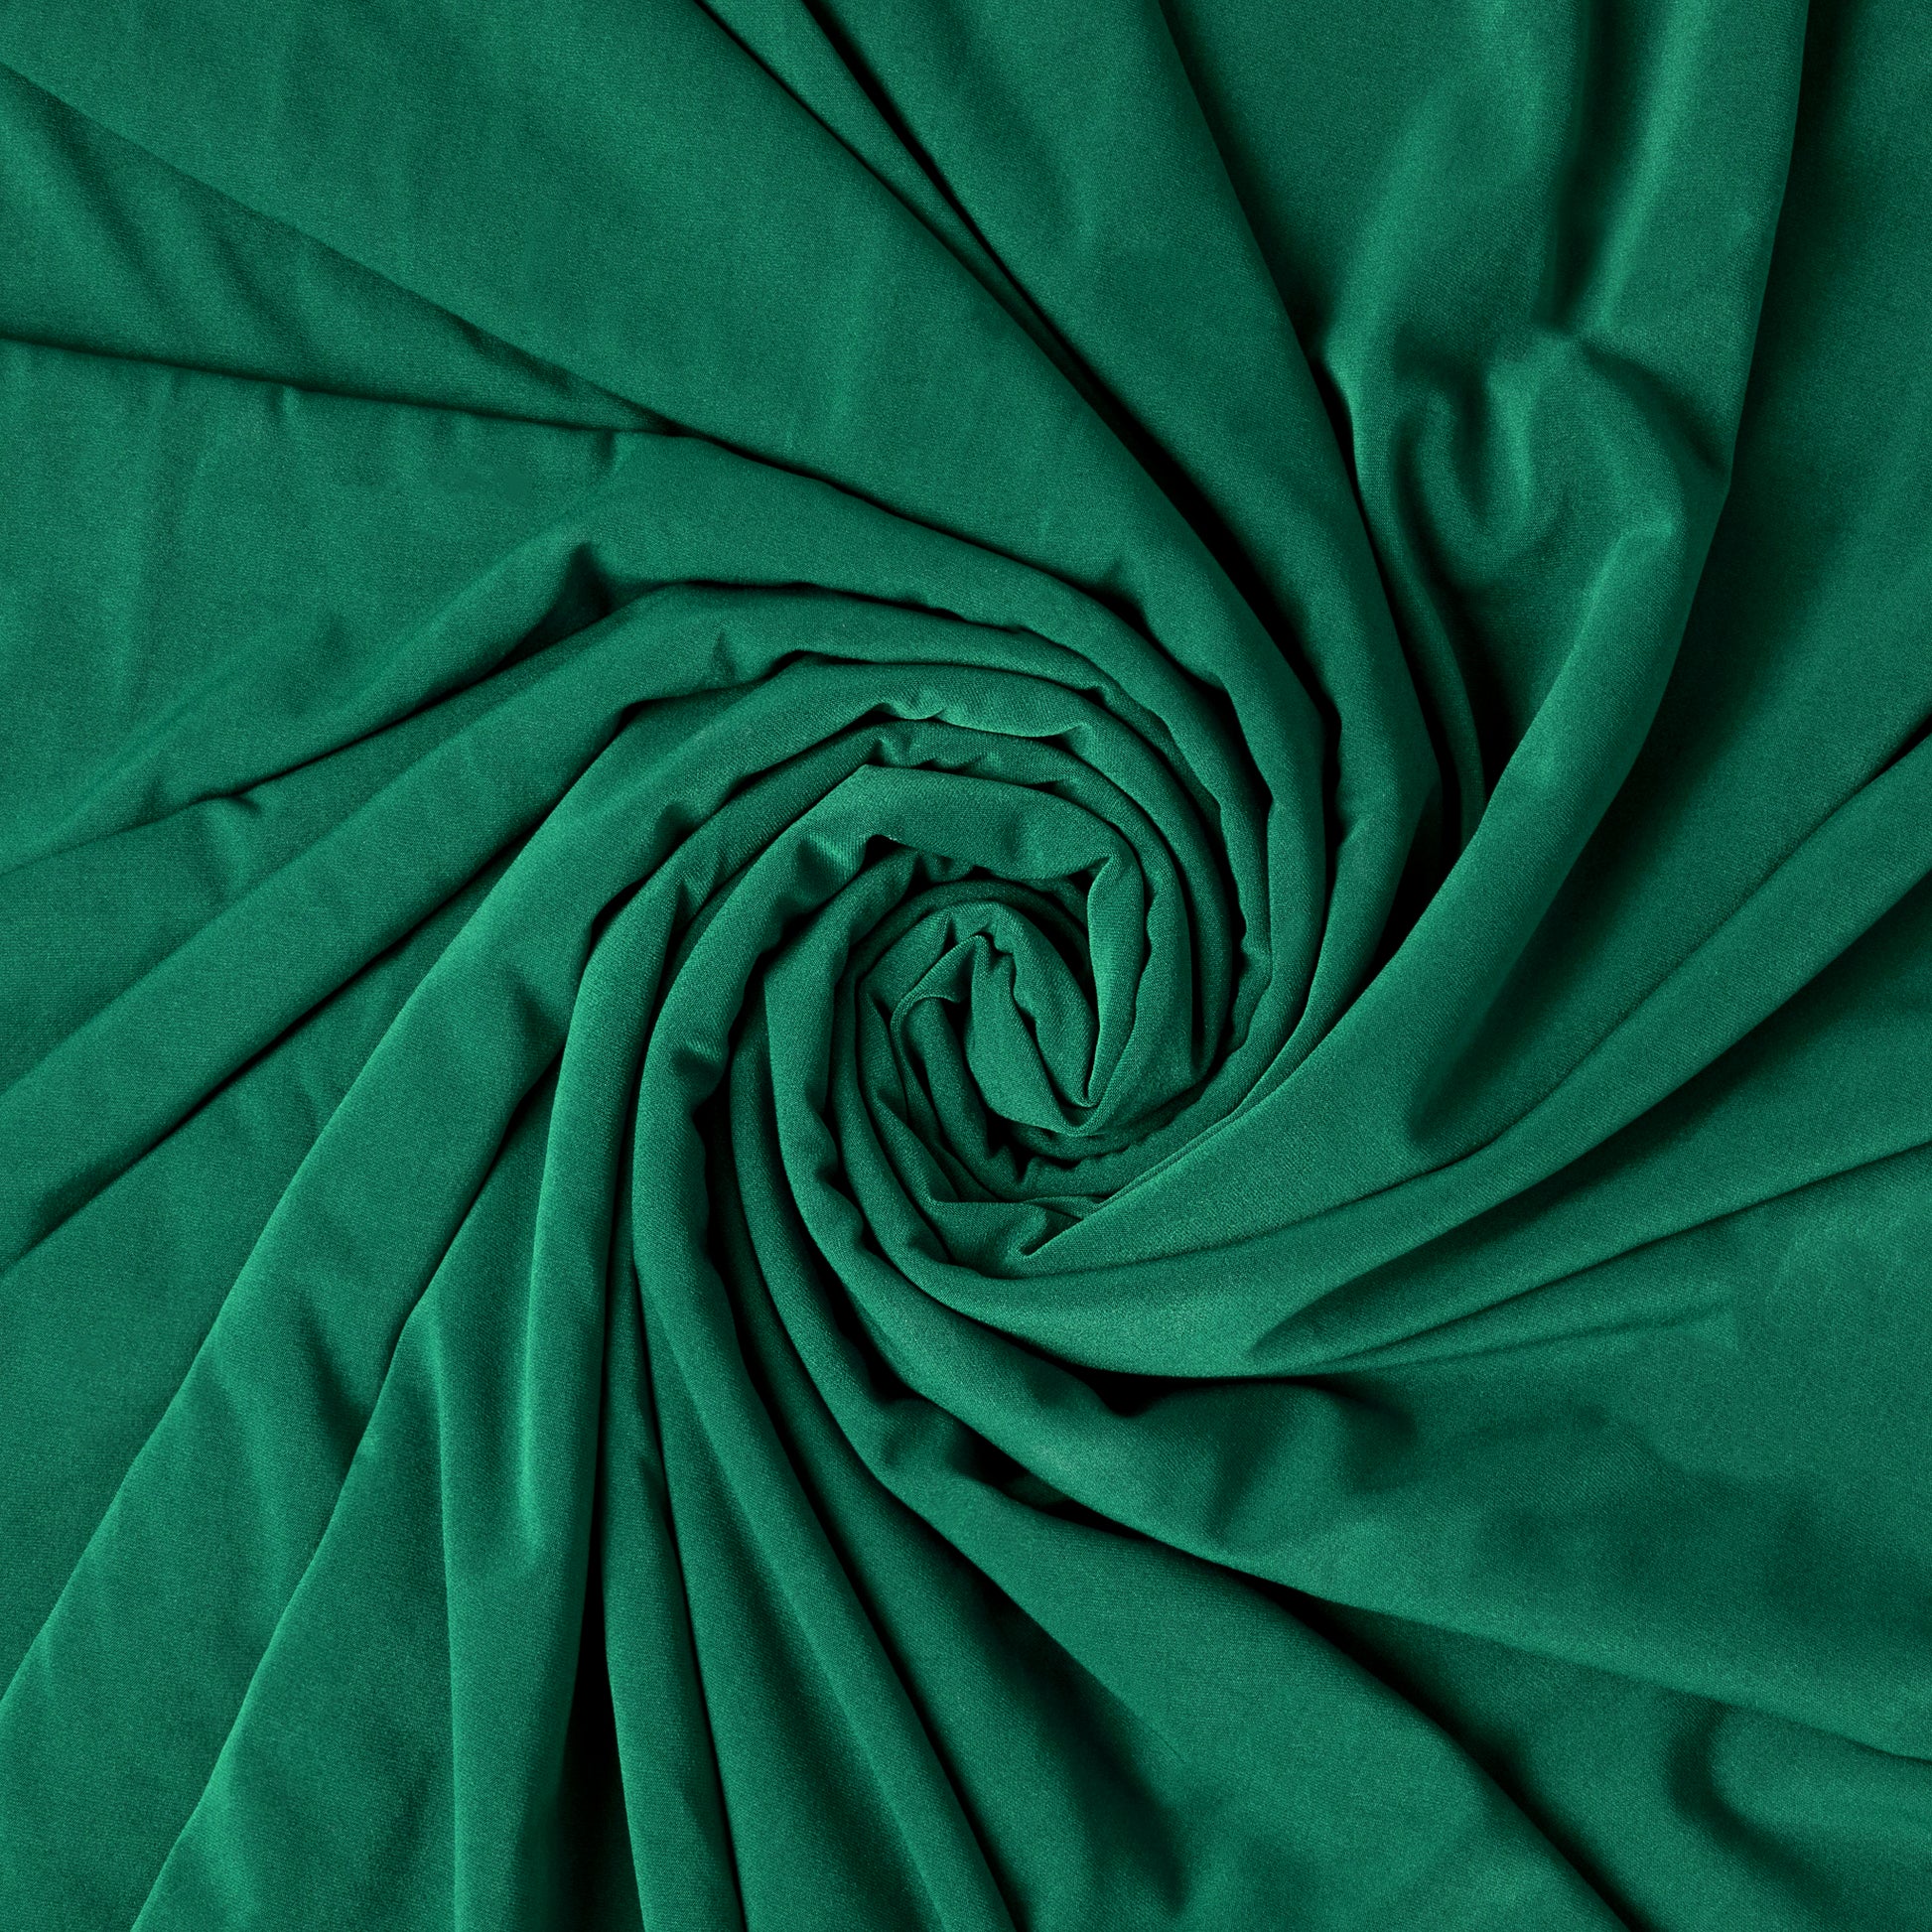 Fabric By The Yard Hunter Green Stretch Satin Spandex Fabric Heavy Weight